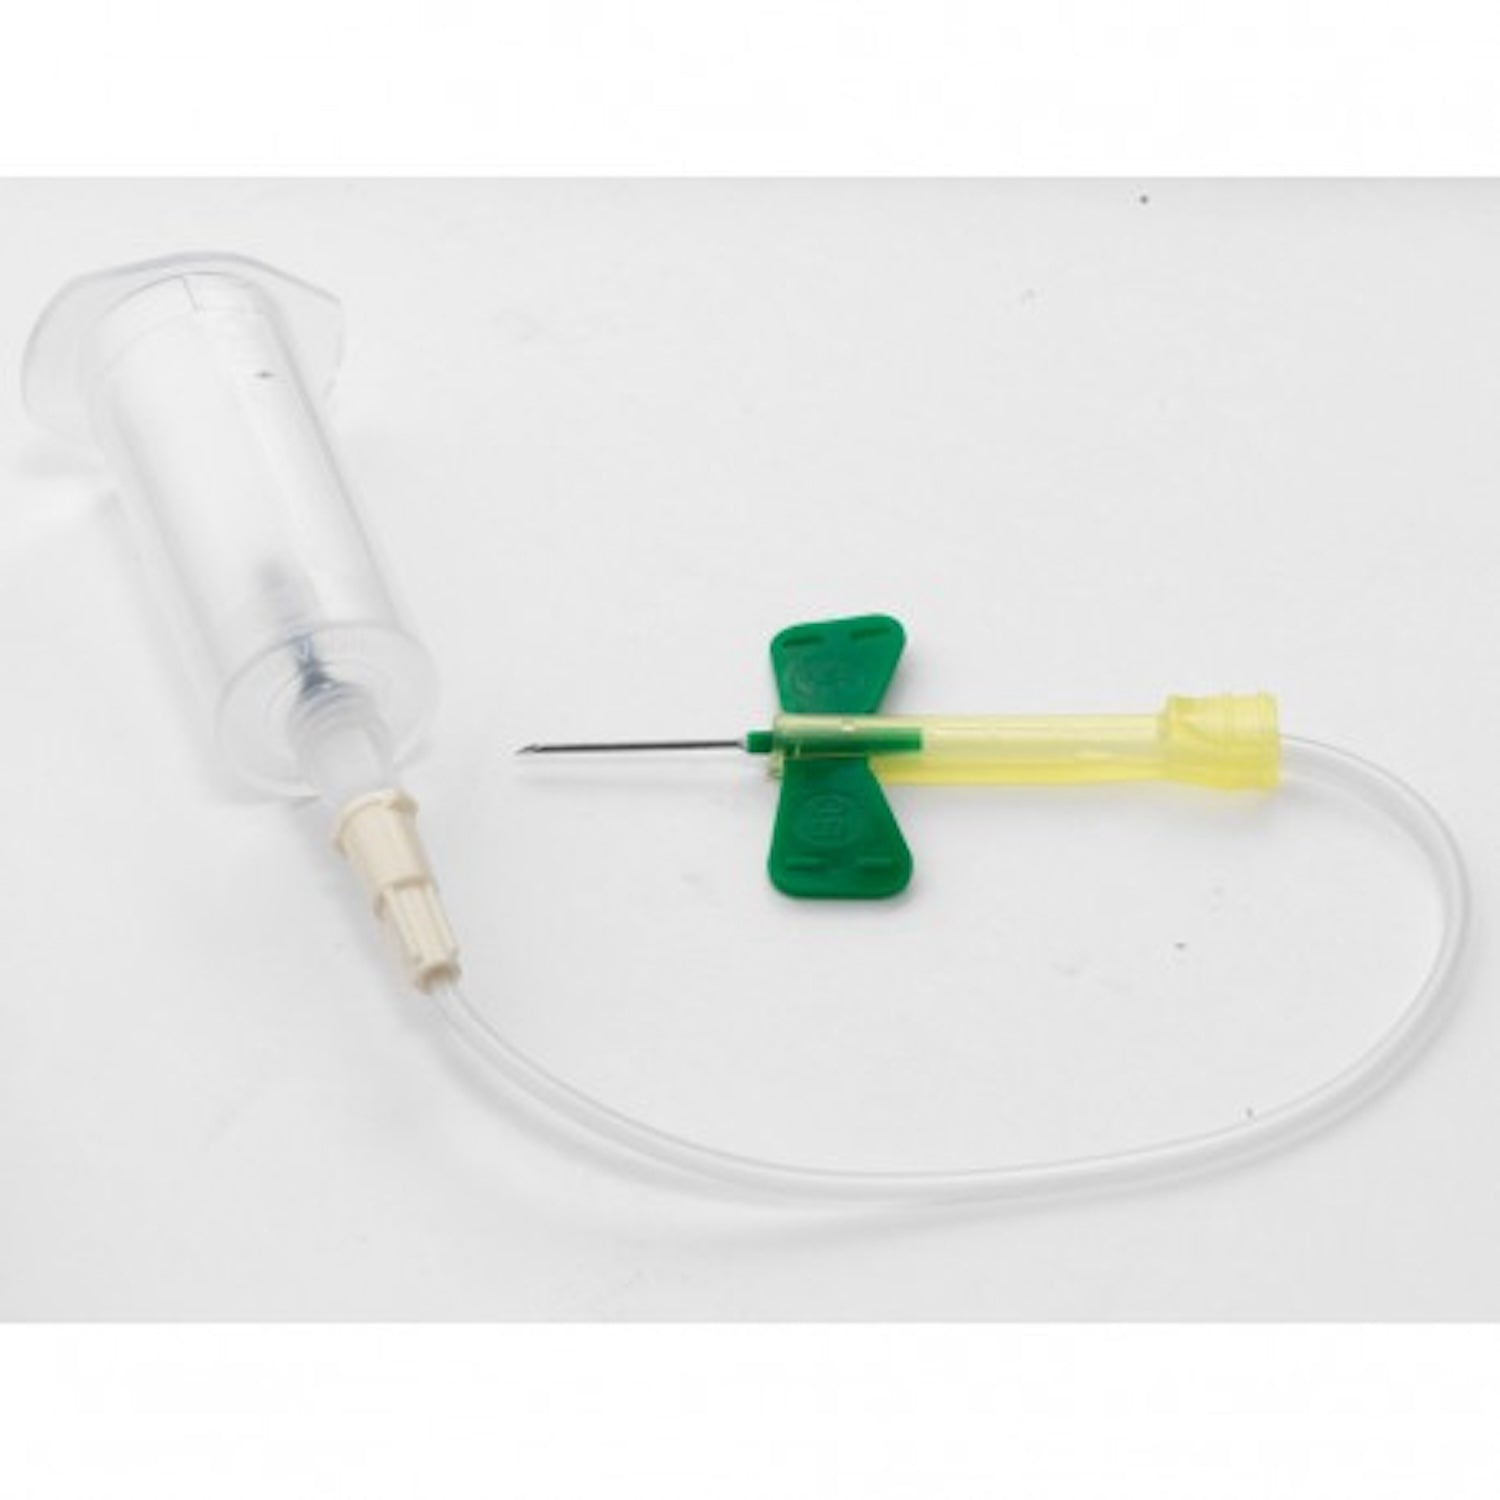 BD Vacutainer Safety Lok Blood Collection System with Pre-attached Holder | 0.75" Needle | 21G x 12" Tubing | Pack of 25 (1)